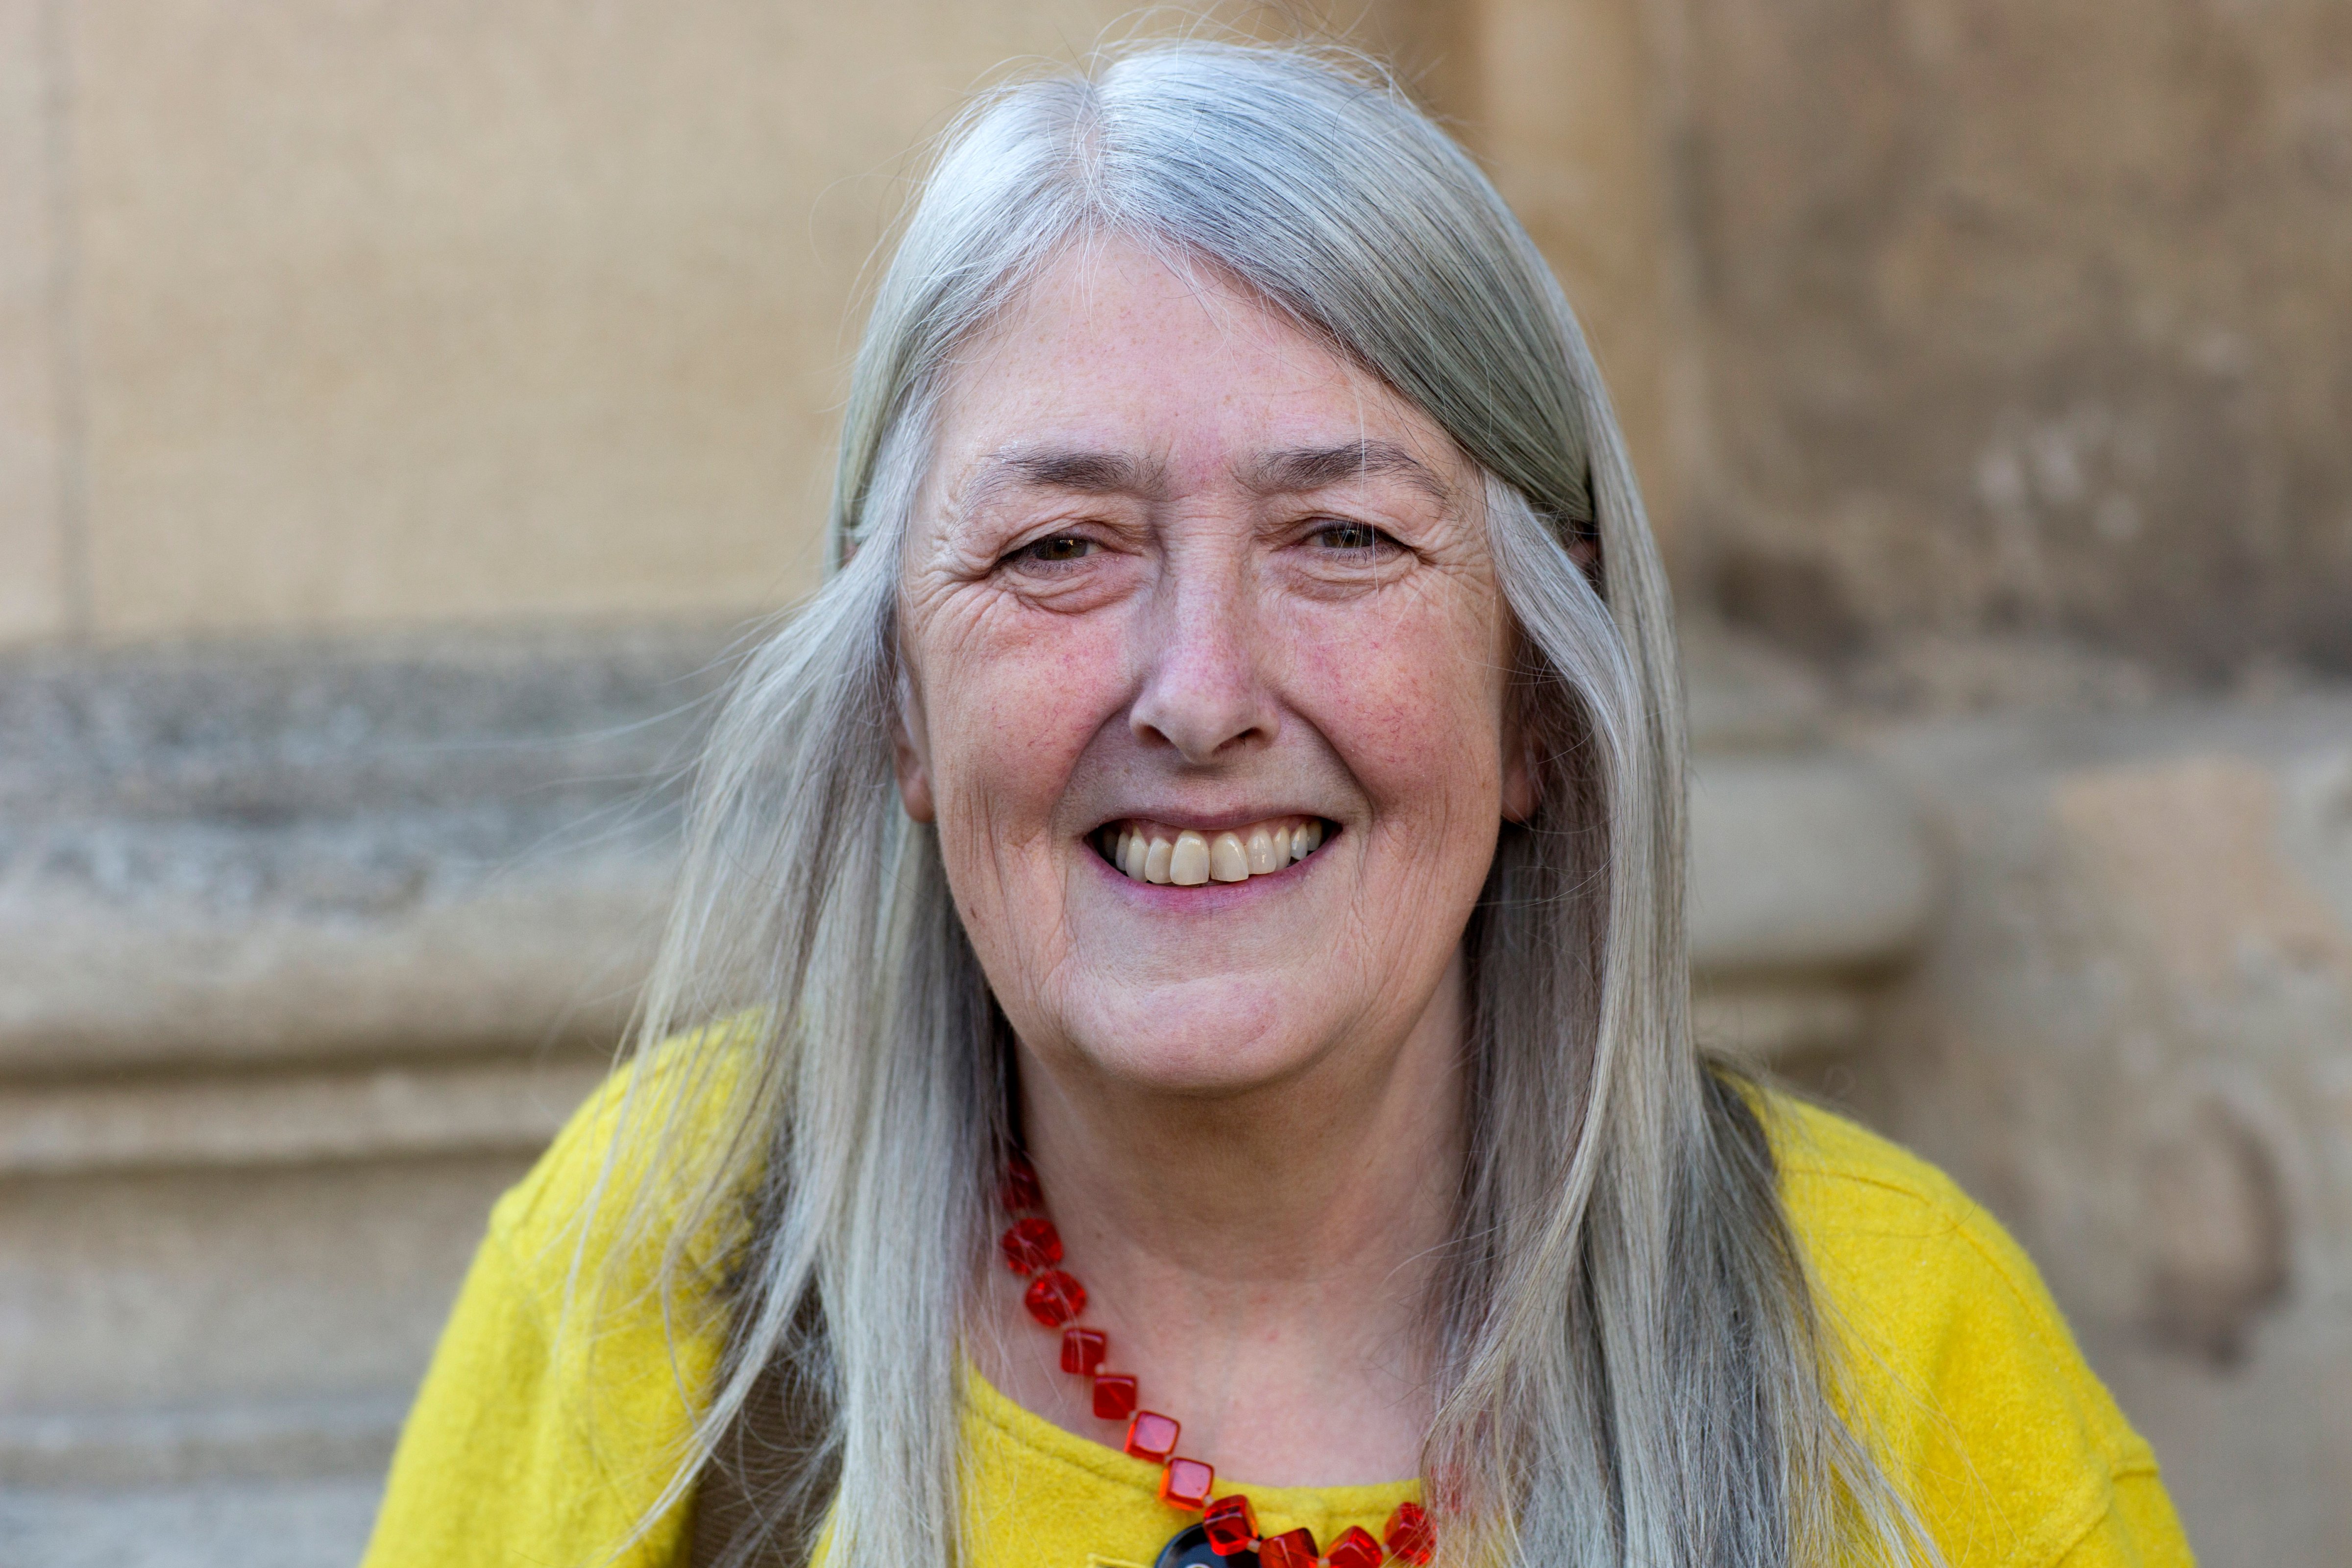 Professor Mary Beard, classicist and writer, at the FT Weekend Oxford Literary Festival on April 5, 2016 in Oxford, England. (David Levenson – Getty Images)